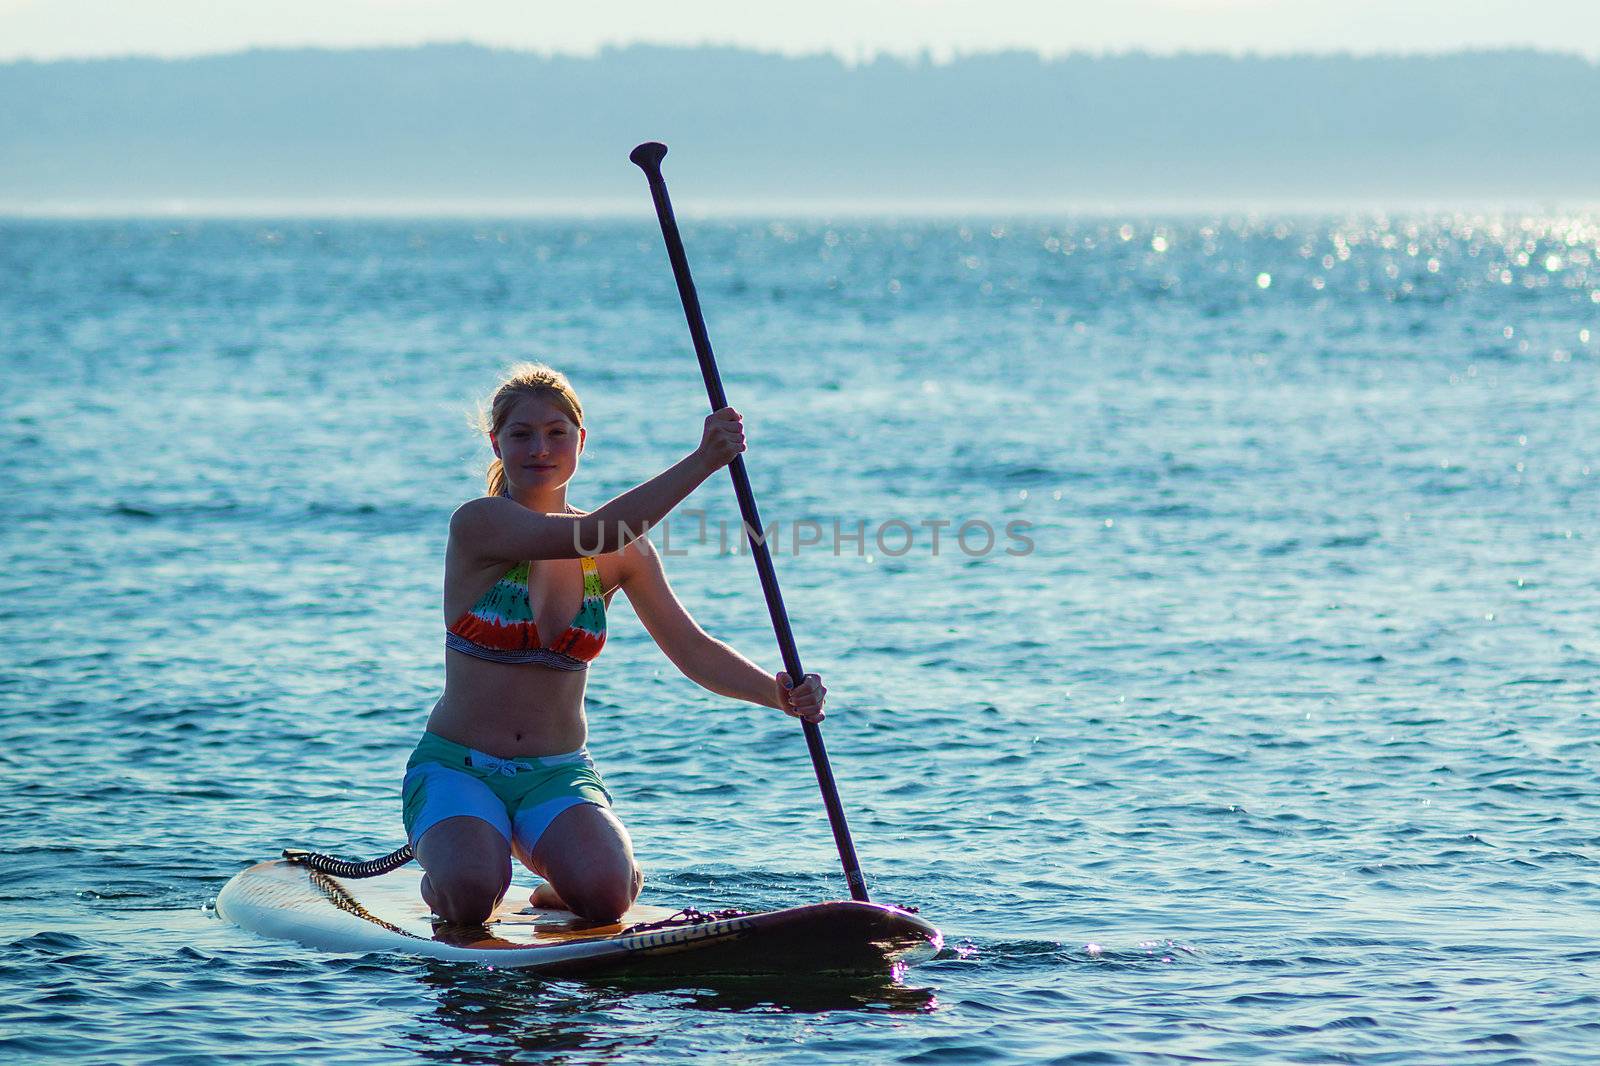 Woman paddling stand up paddle board while kneeling.